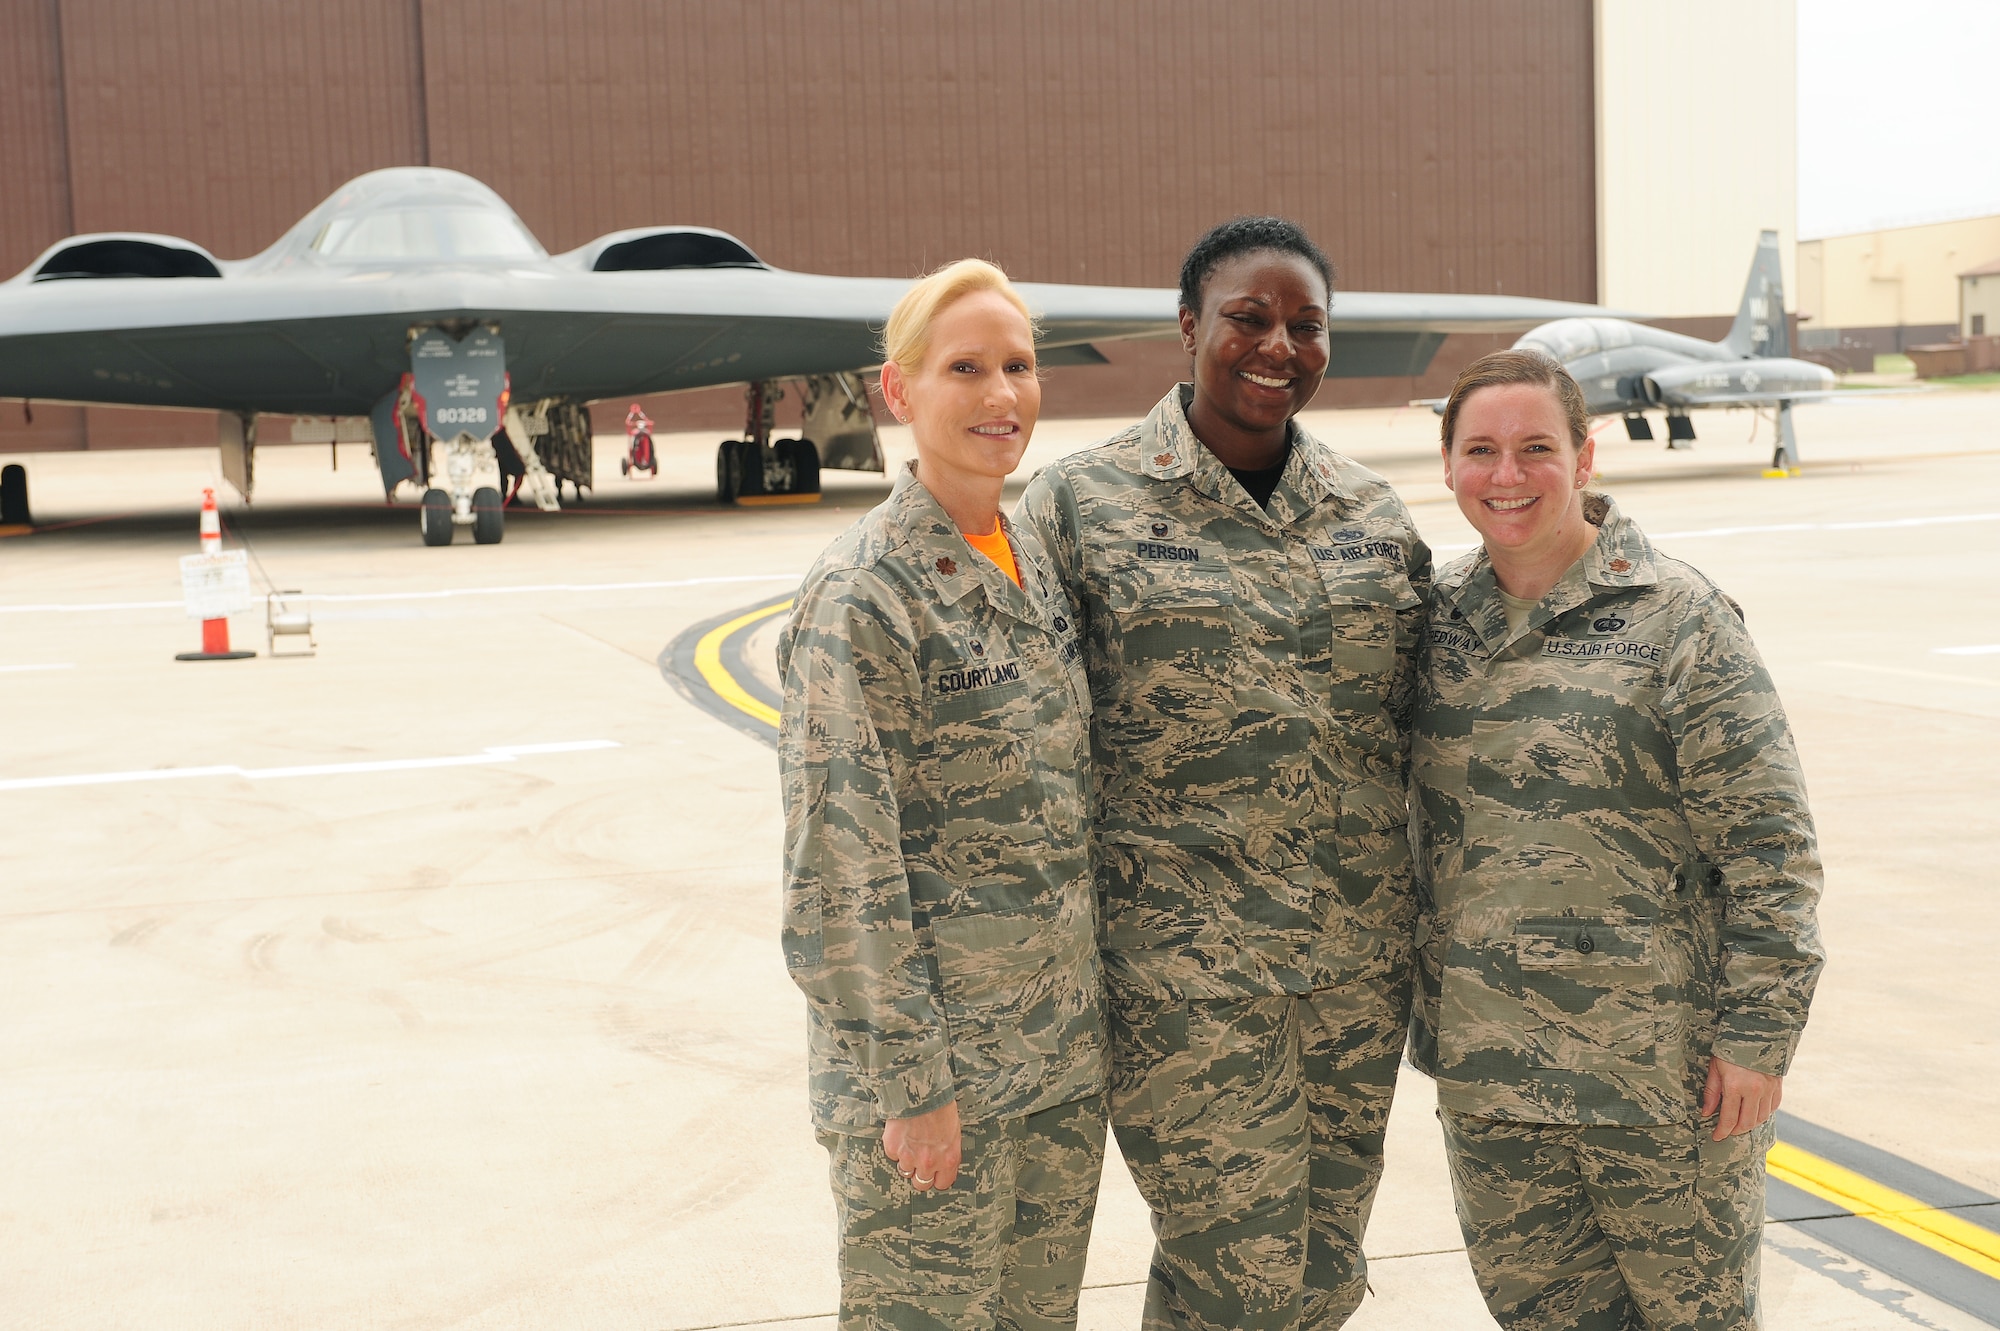 Maj. Kellie Courtland, left, 509th Logistics Readiness Squadron commander, Maj. Redahlia Person, center, 509th Maintenance Squadron commander, and Maj. Catherine Tredway, 509th Force Support Squadron commander, stand in front of 509th Bomb Wing B-2 Spirit and T-38 Talon aircraft July 24, 2015 at Whiteman Air Force Base, Mo. March is Women’s History Month (WHM), and the trio represent the 2016 WHM theme, “Working to Form a More Perfect Union: Honoring Women in Public Service and Government
(U.S. Air Force photo by Airman 1st Class Jazmin Smith)

